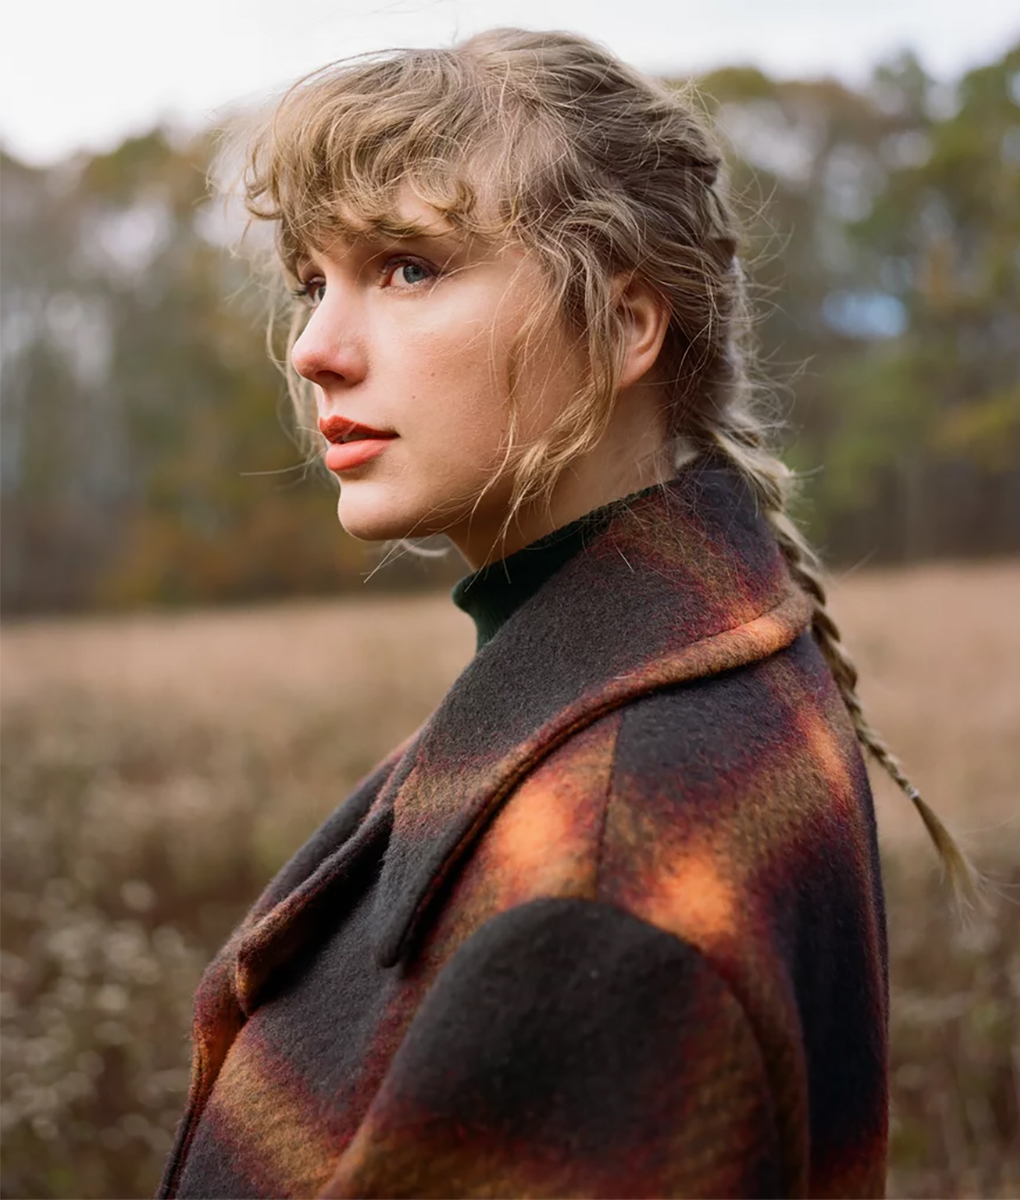 Evenmore, Taylor Swift’s Checkered Plaid Long Coat